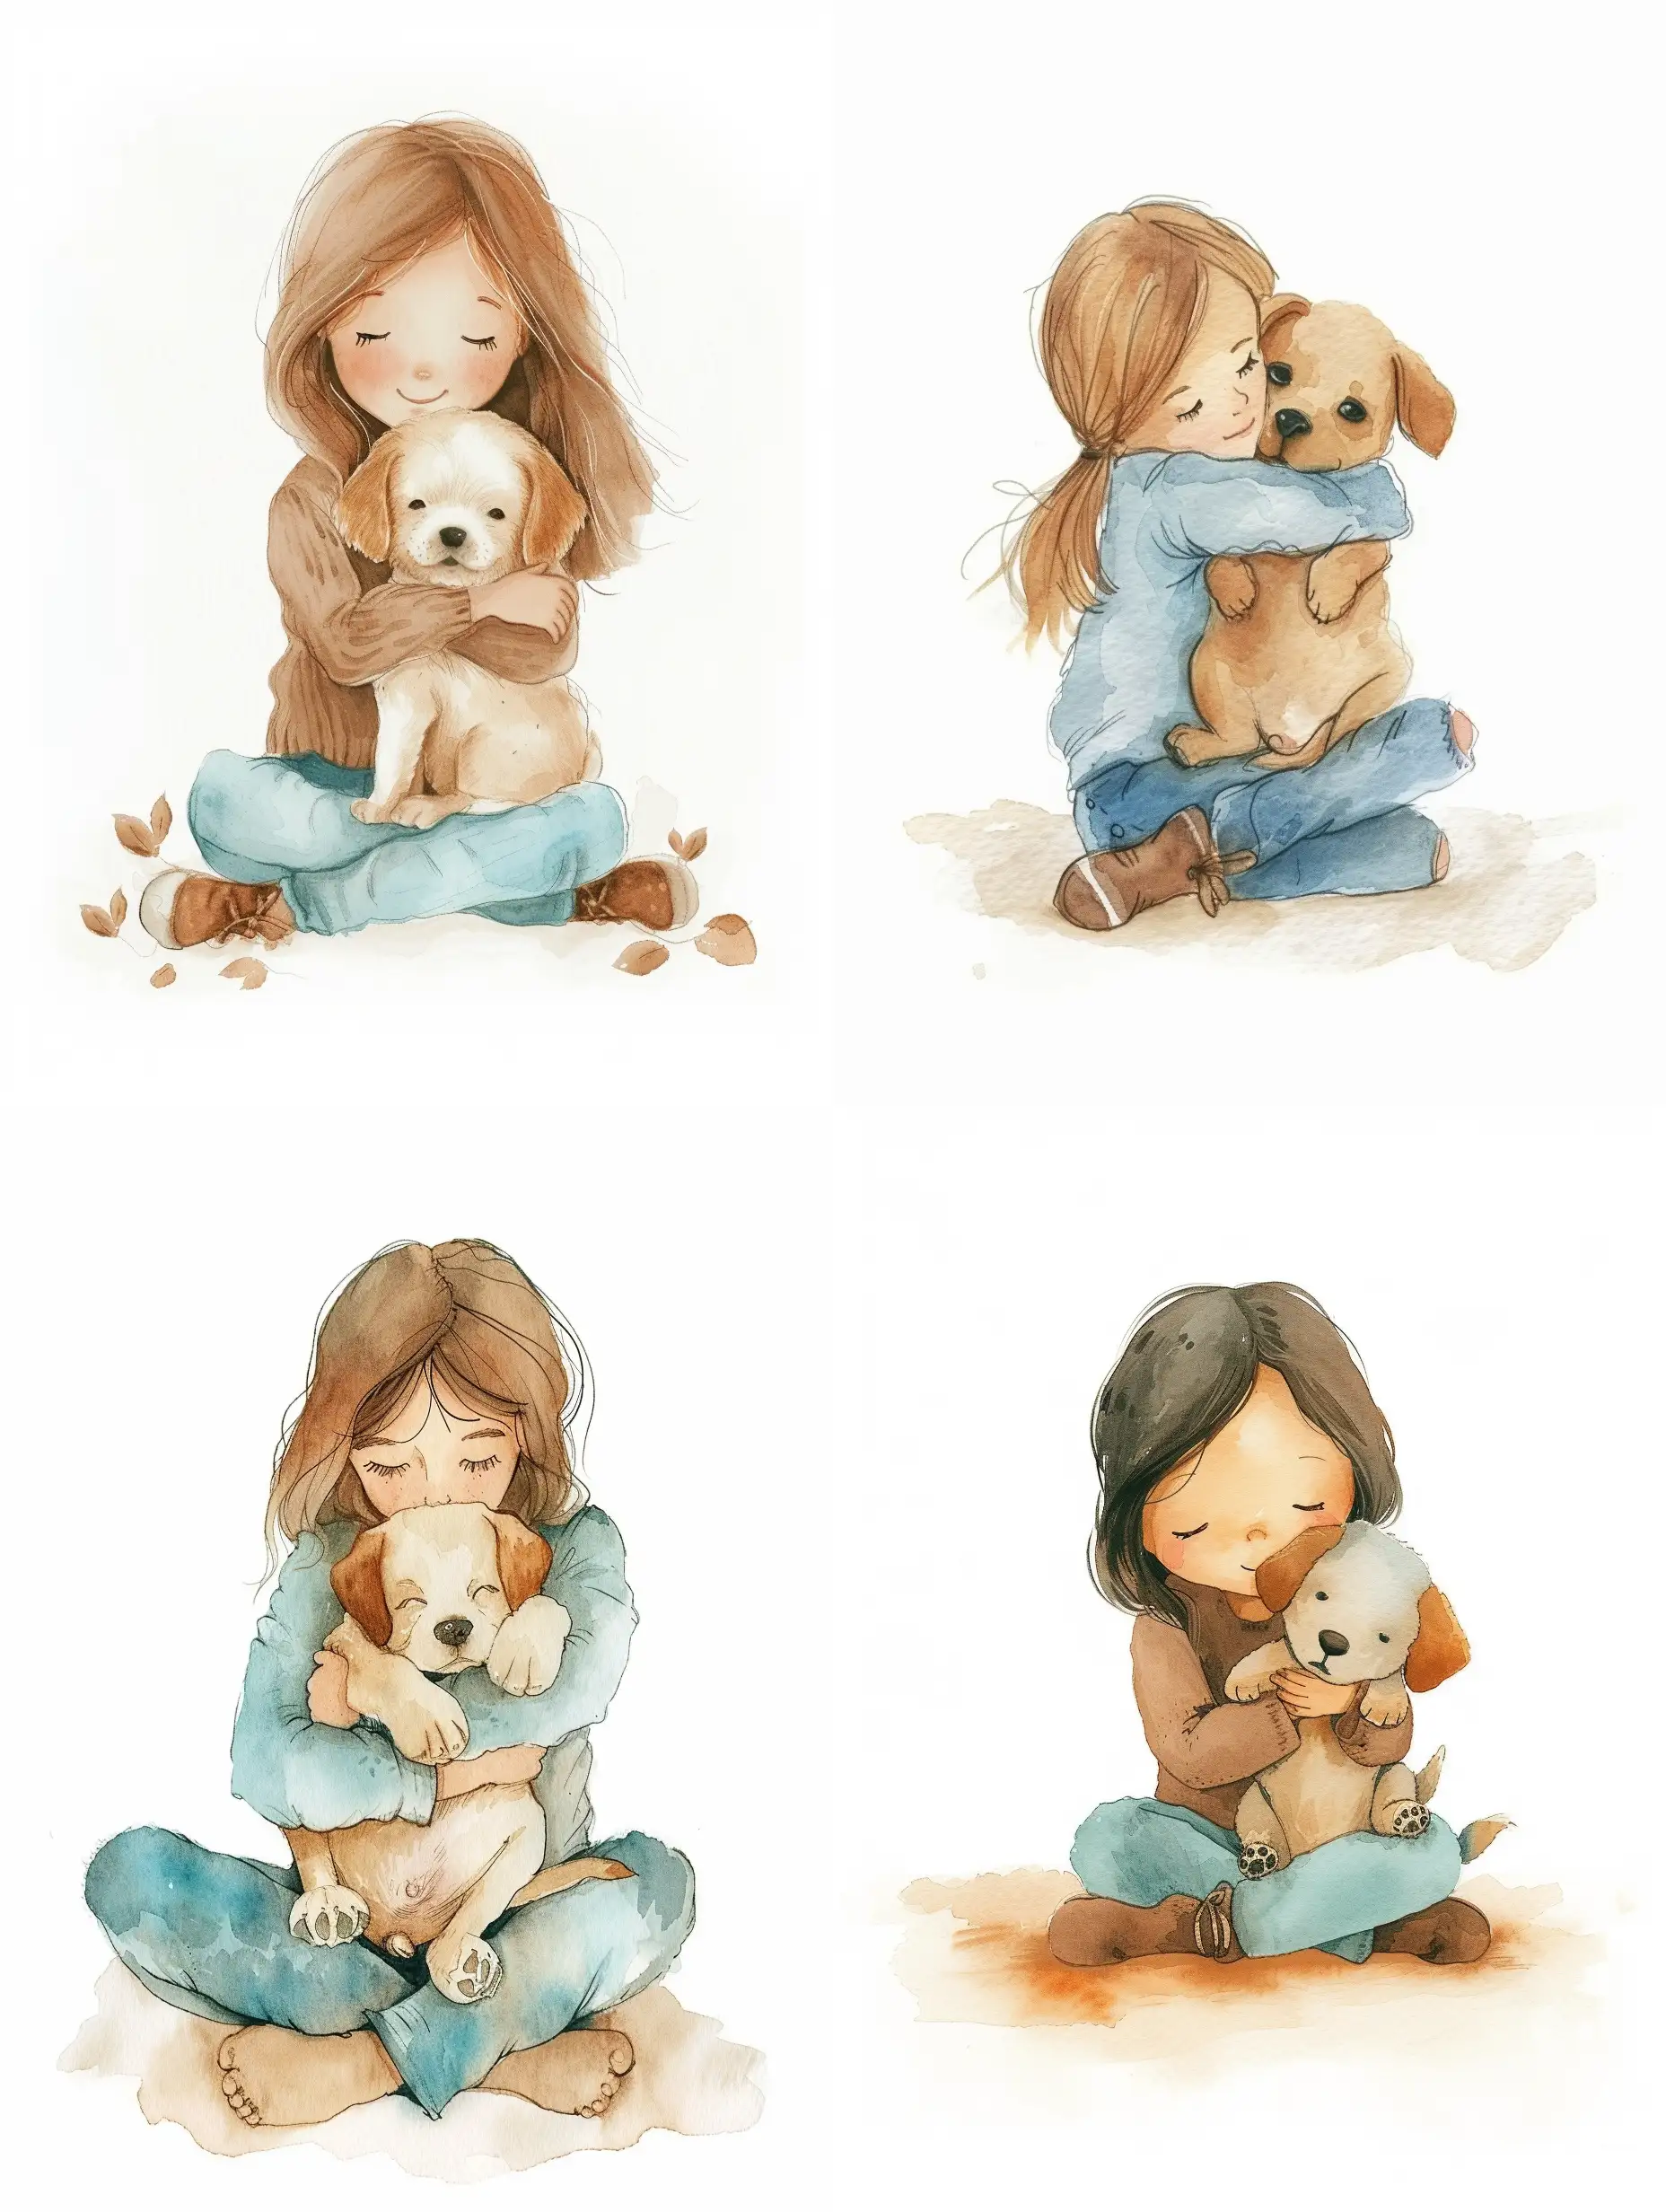 Adorable-Girl-Embracing-a-Cute-Puppy-in-Warm-Watercolor-Illustration